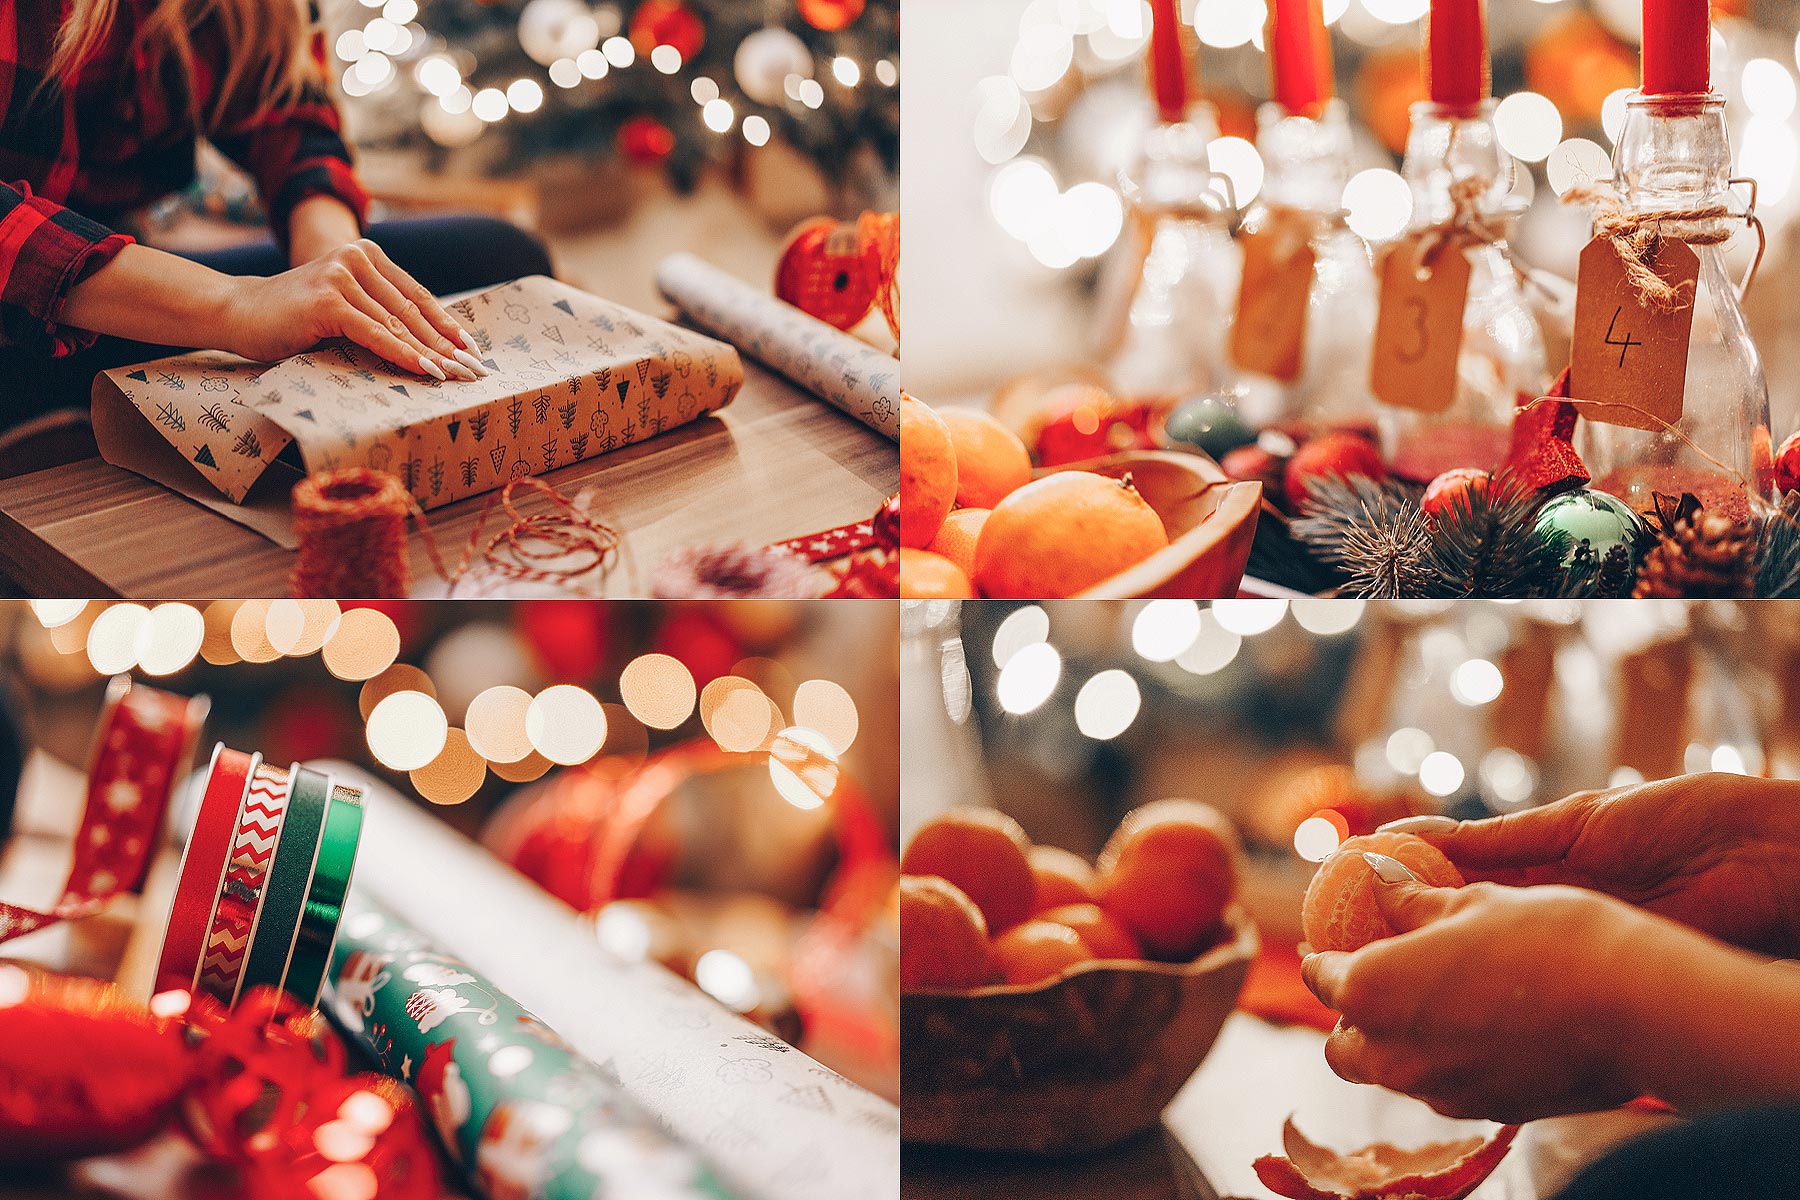 Christmas stock photos: gift wrapping, sweet morning breakfast, fresh yummy tangerine and more!